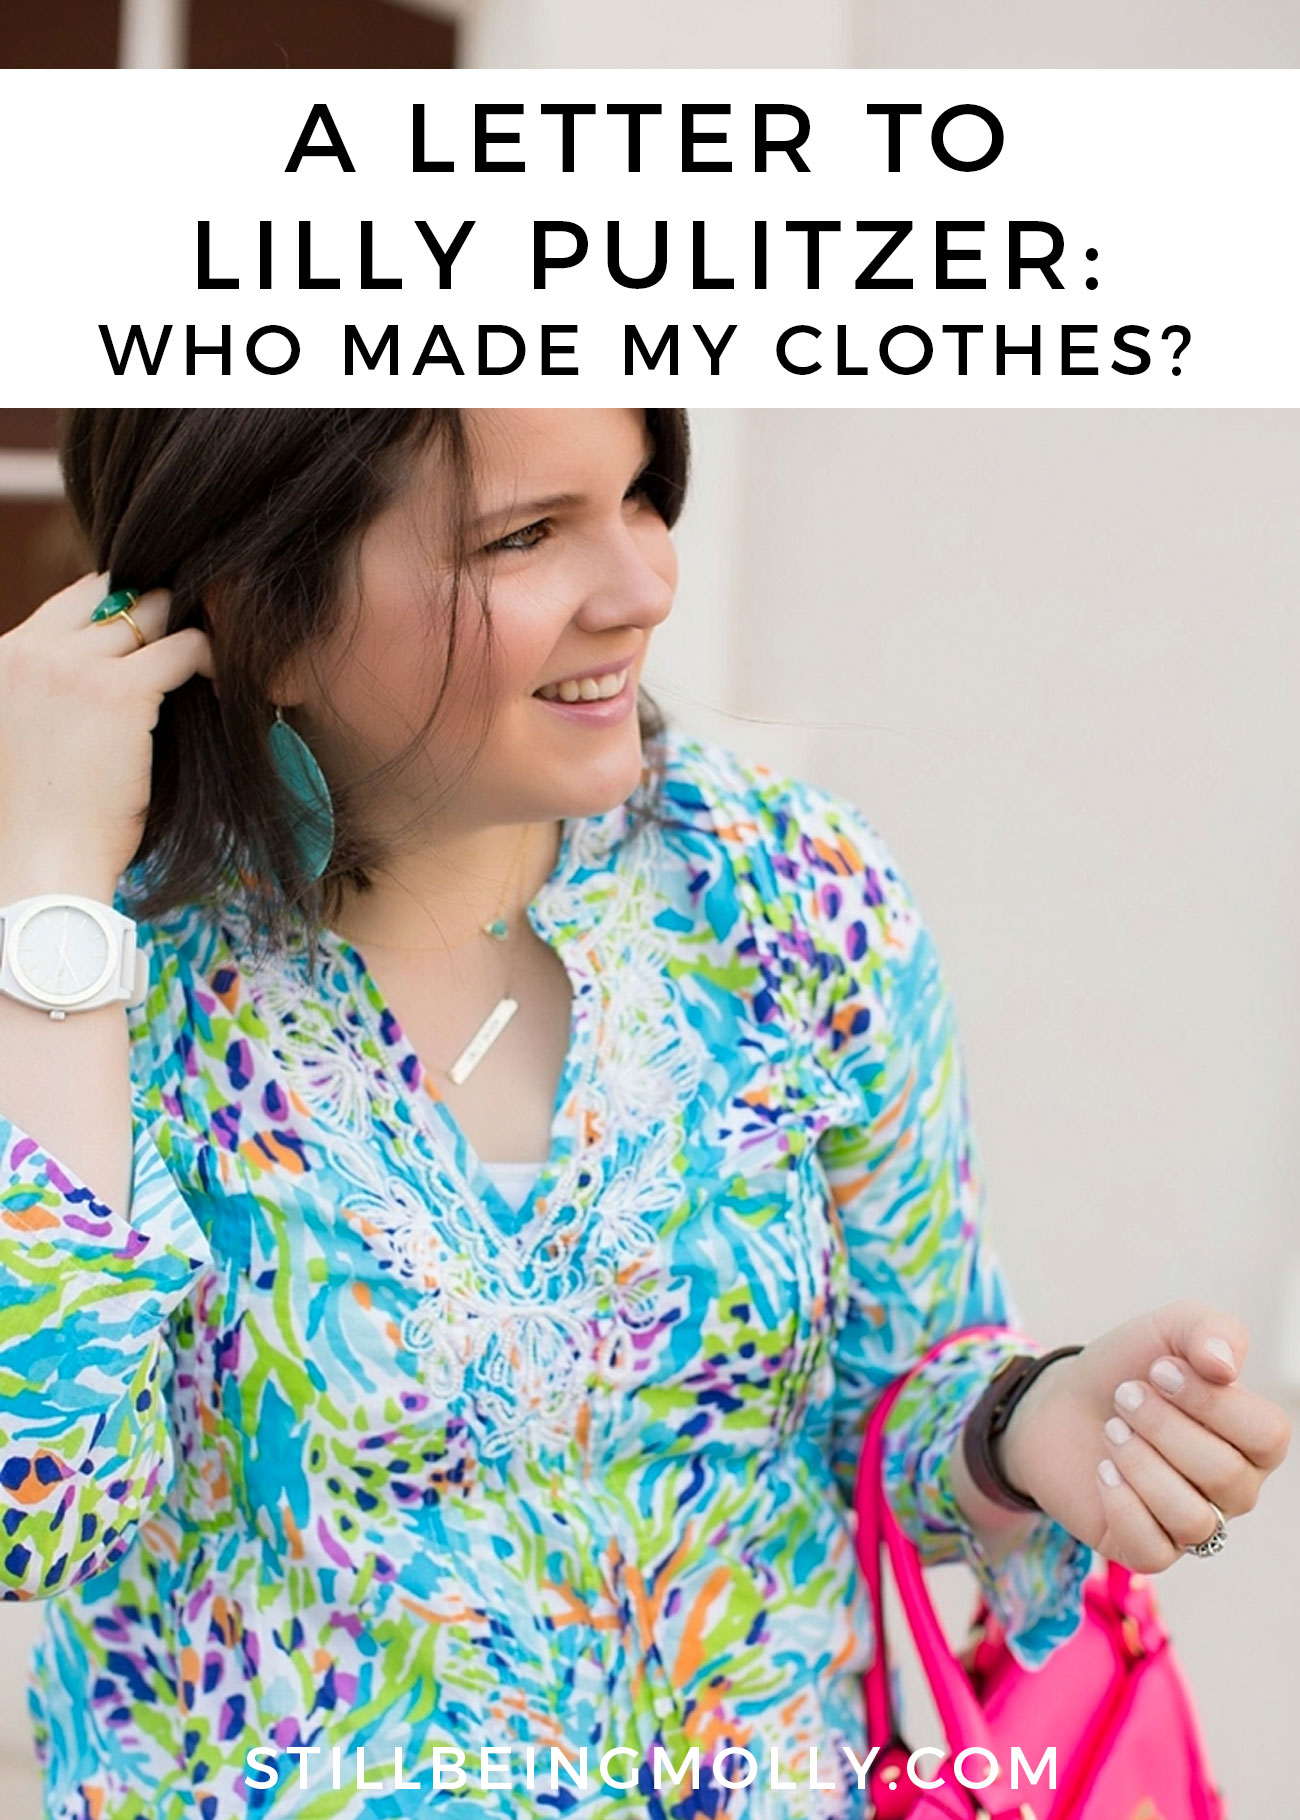 Dear Lilly Pulitzer Fashion ... Who Made My Clothes? by North Carolina ethical fashion blogger Still Being Molly